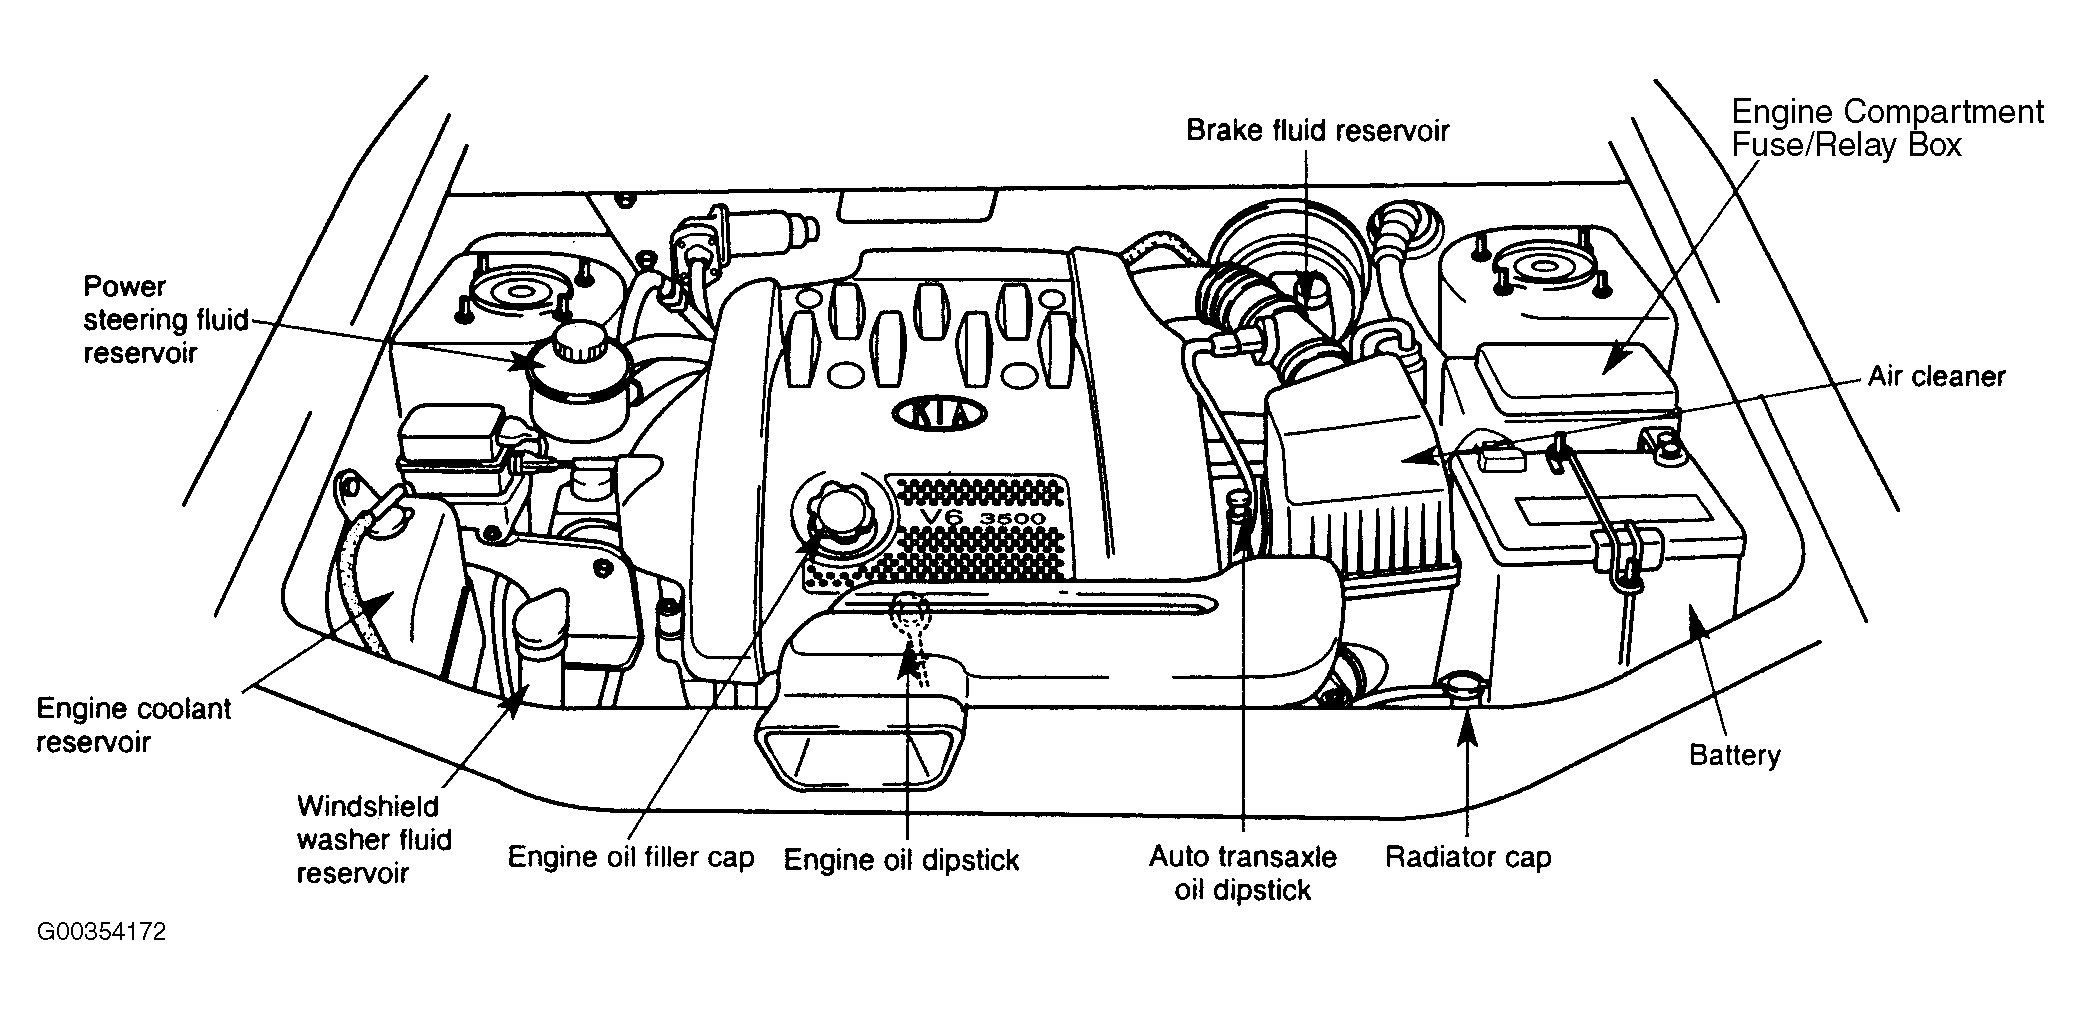 2002 Kia Spectra Engine Diagram Radio and Instrument Cluster Lights Stopped Working On My 2002 Kia Of 2002 Kia Spectra Engine Diagram